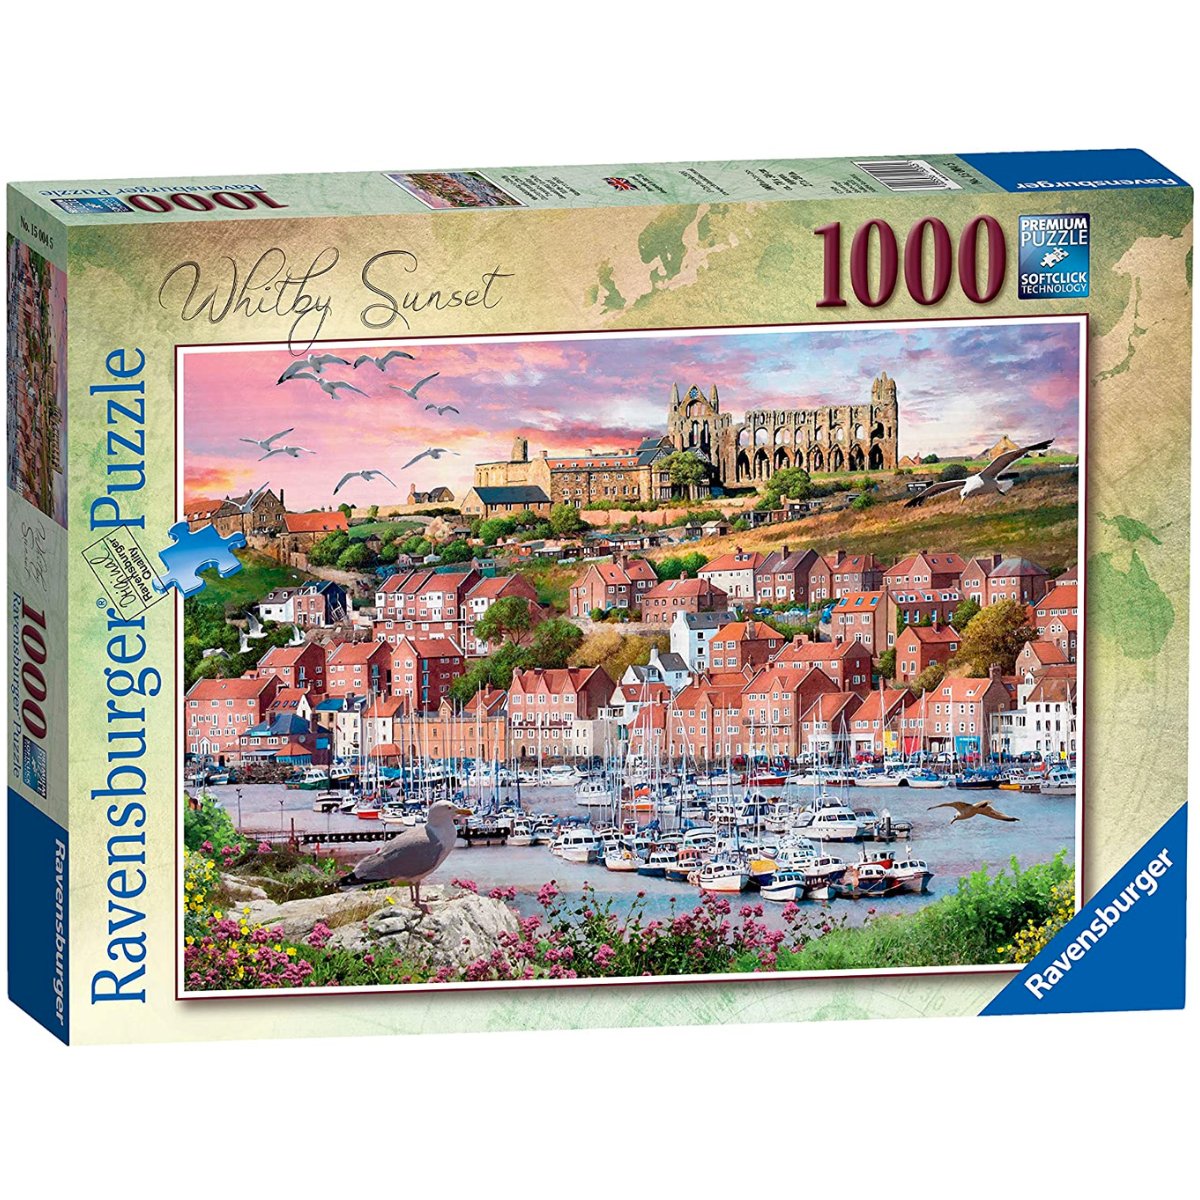 Ravensburger Whitby Sunset Jigsaw Puzzle (1000 Pieces) - Phillips Hobbies